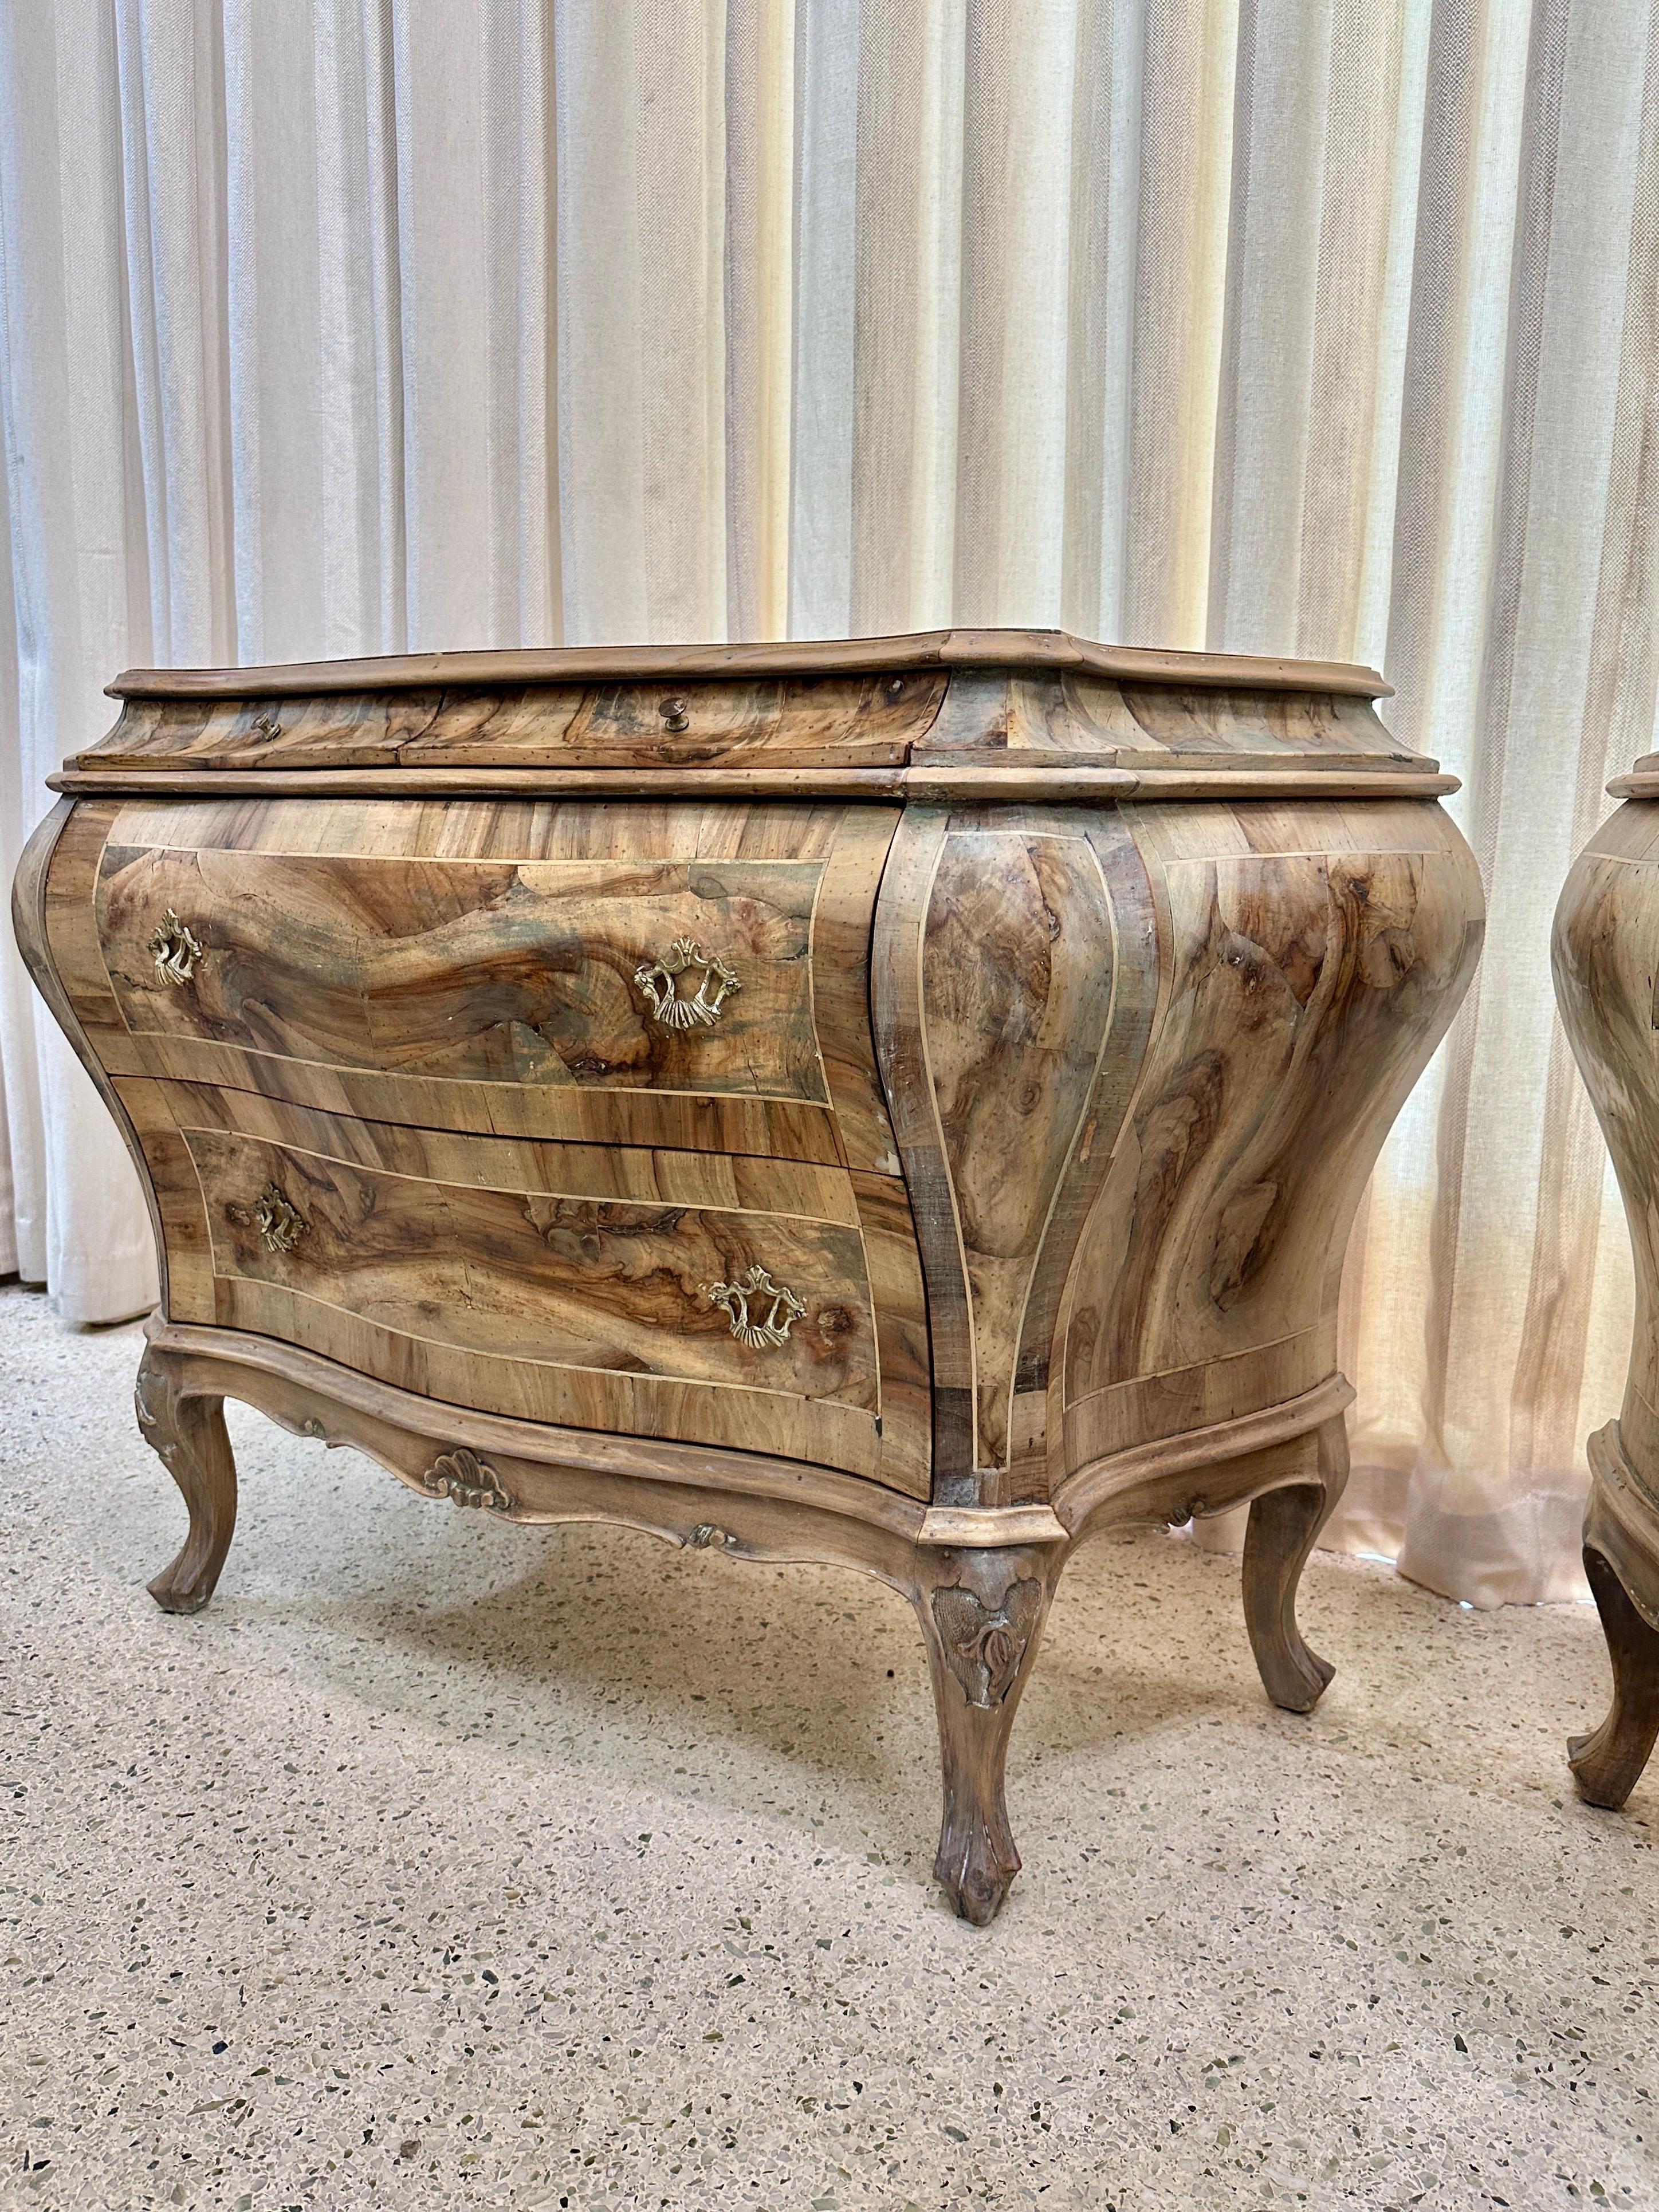 These rare olive wood veneer patchwork commodes in a waxed natural finish, provide ample storage with two large bottom drawers and 2 smaller upper drawers.  The olive wood has been stripped and waxed which highlights the natural beauty of the wood